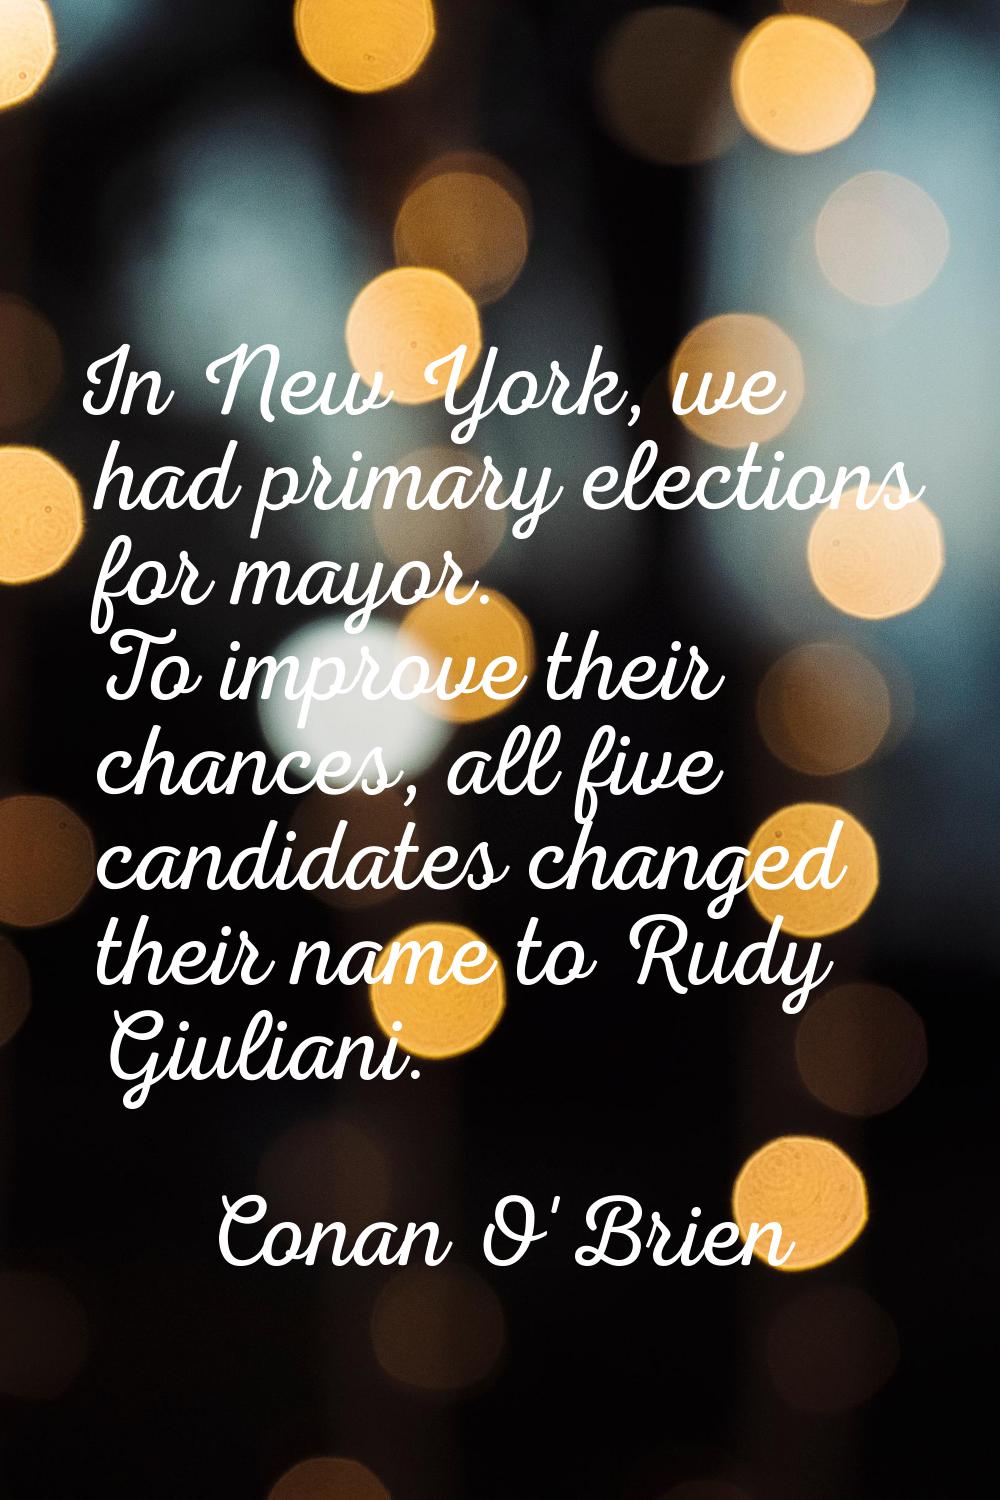 In New York, we had primary elections for mayor. To improve their chances, all five candidates chan